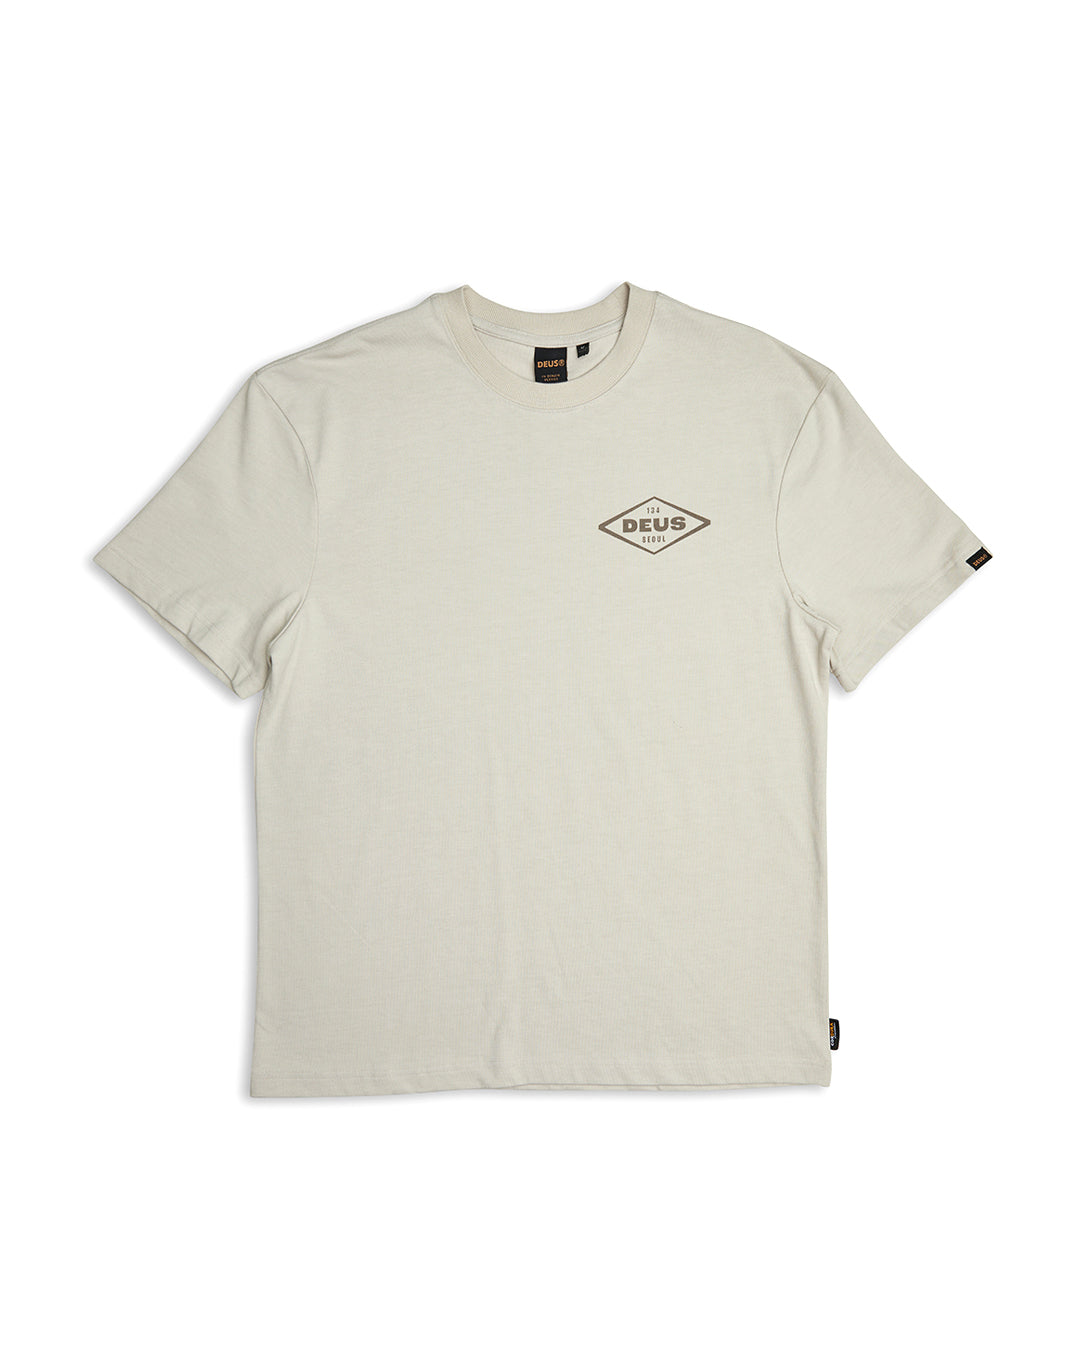 Old Customs Tee Dirty White